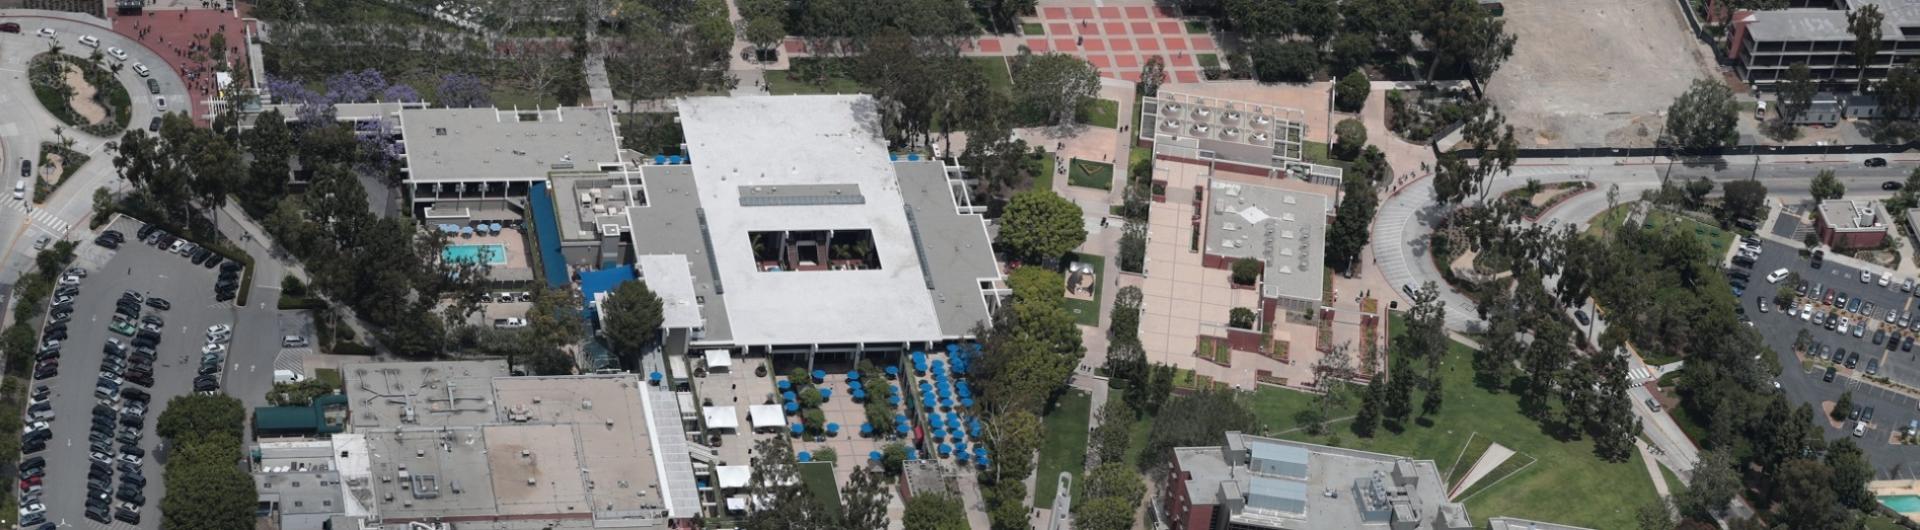 Aerial view of a section of our campus